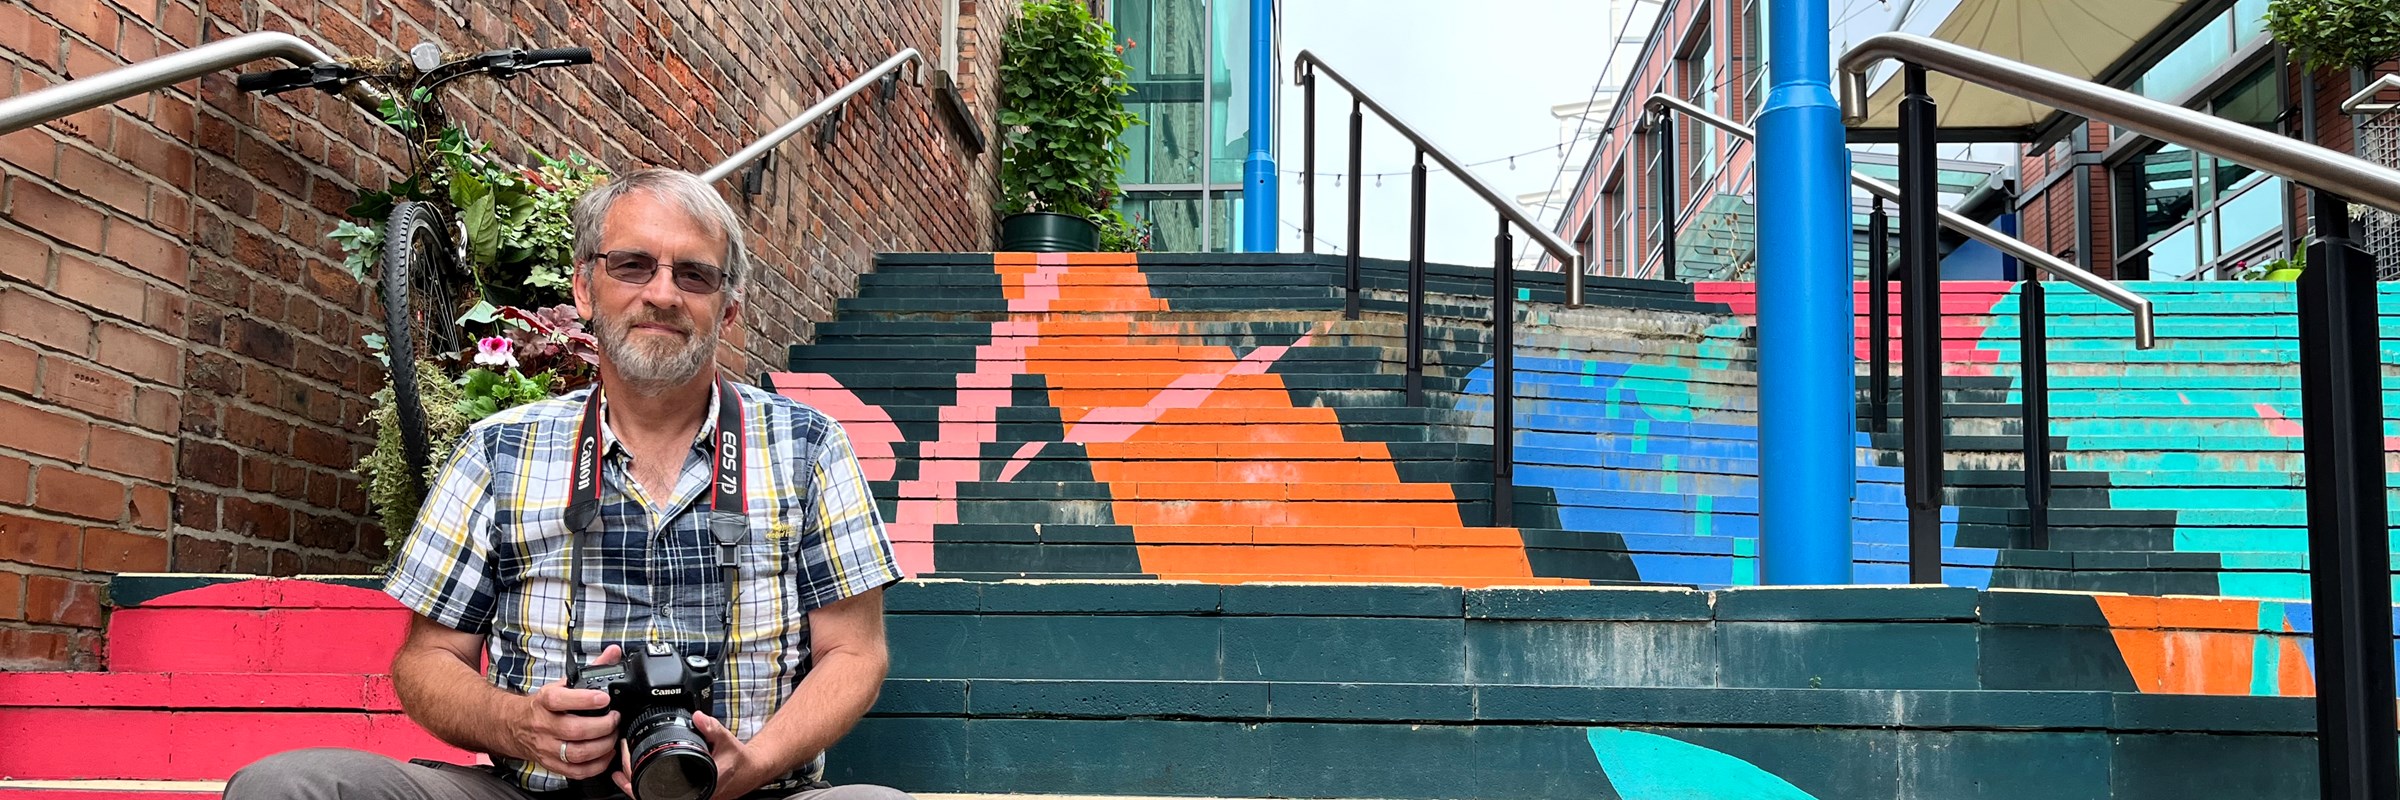 A person wearing a shirt holding a camera sitting on multicoloured steps.